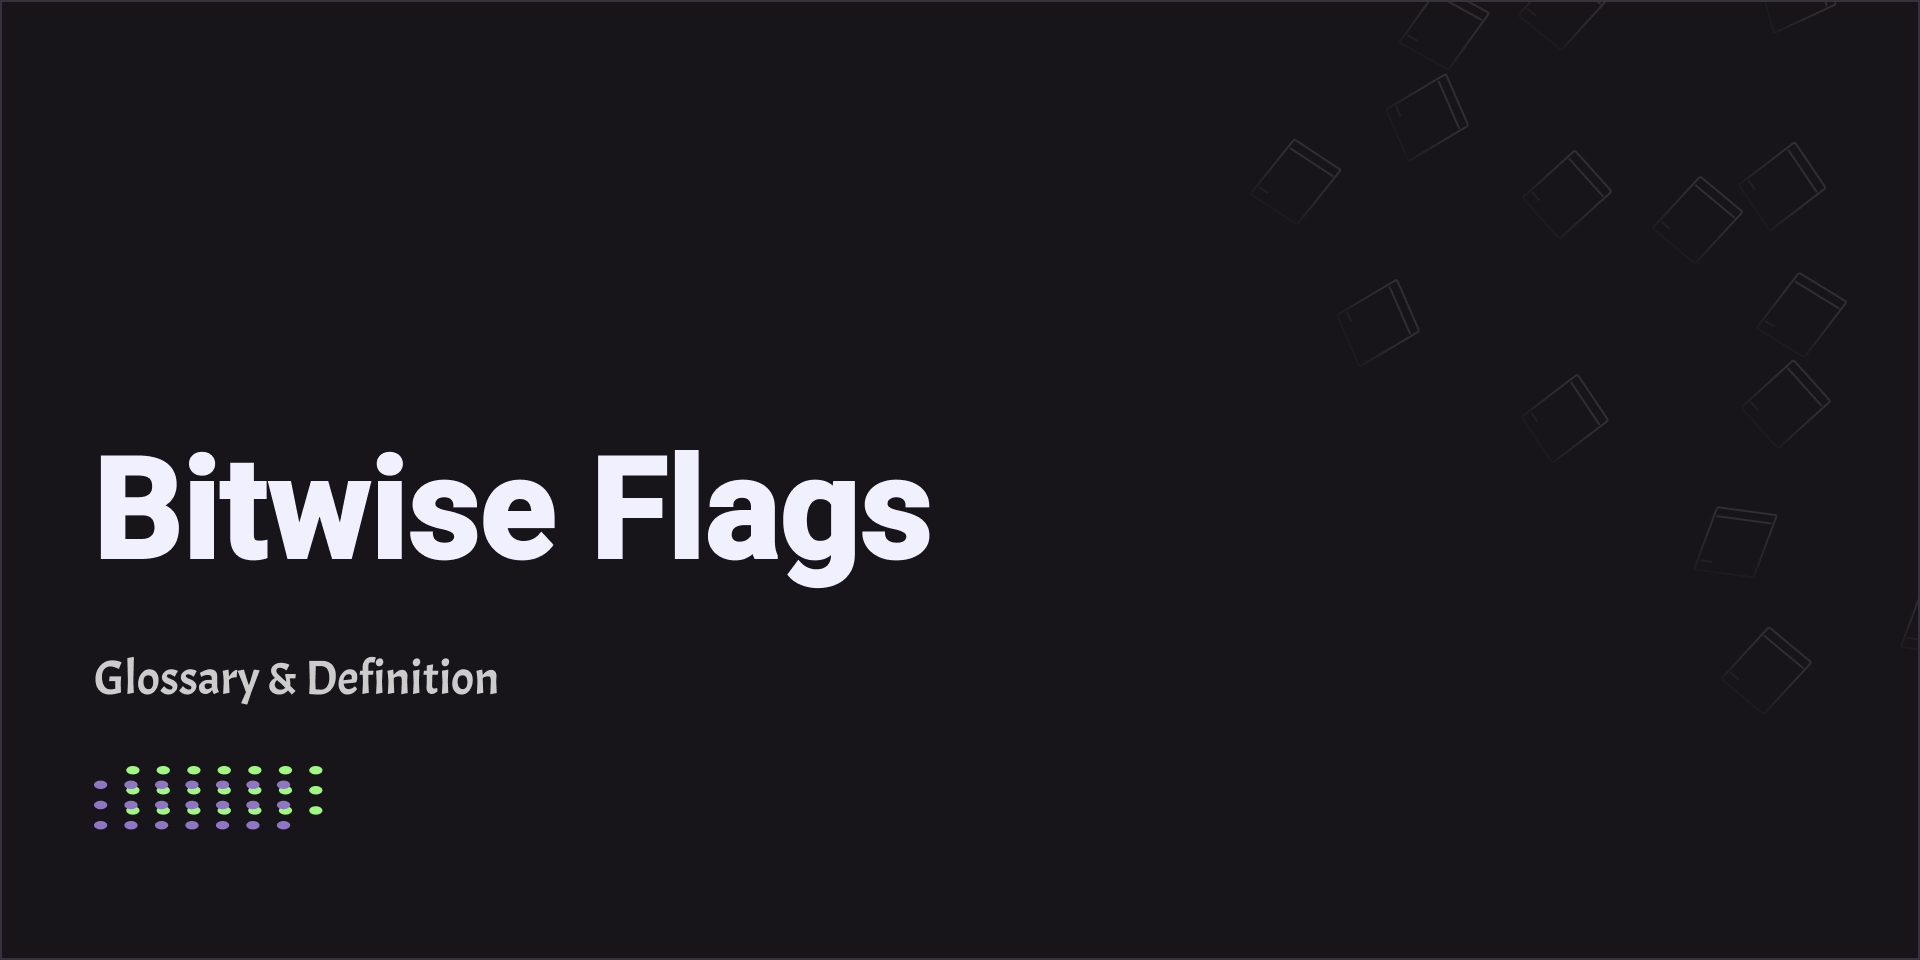 Bitwise Flags